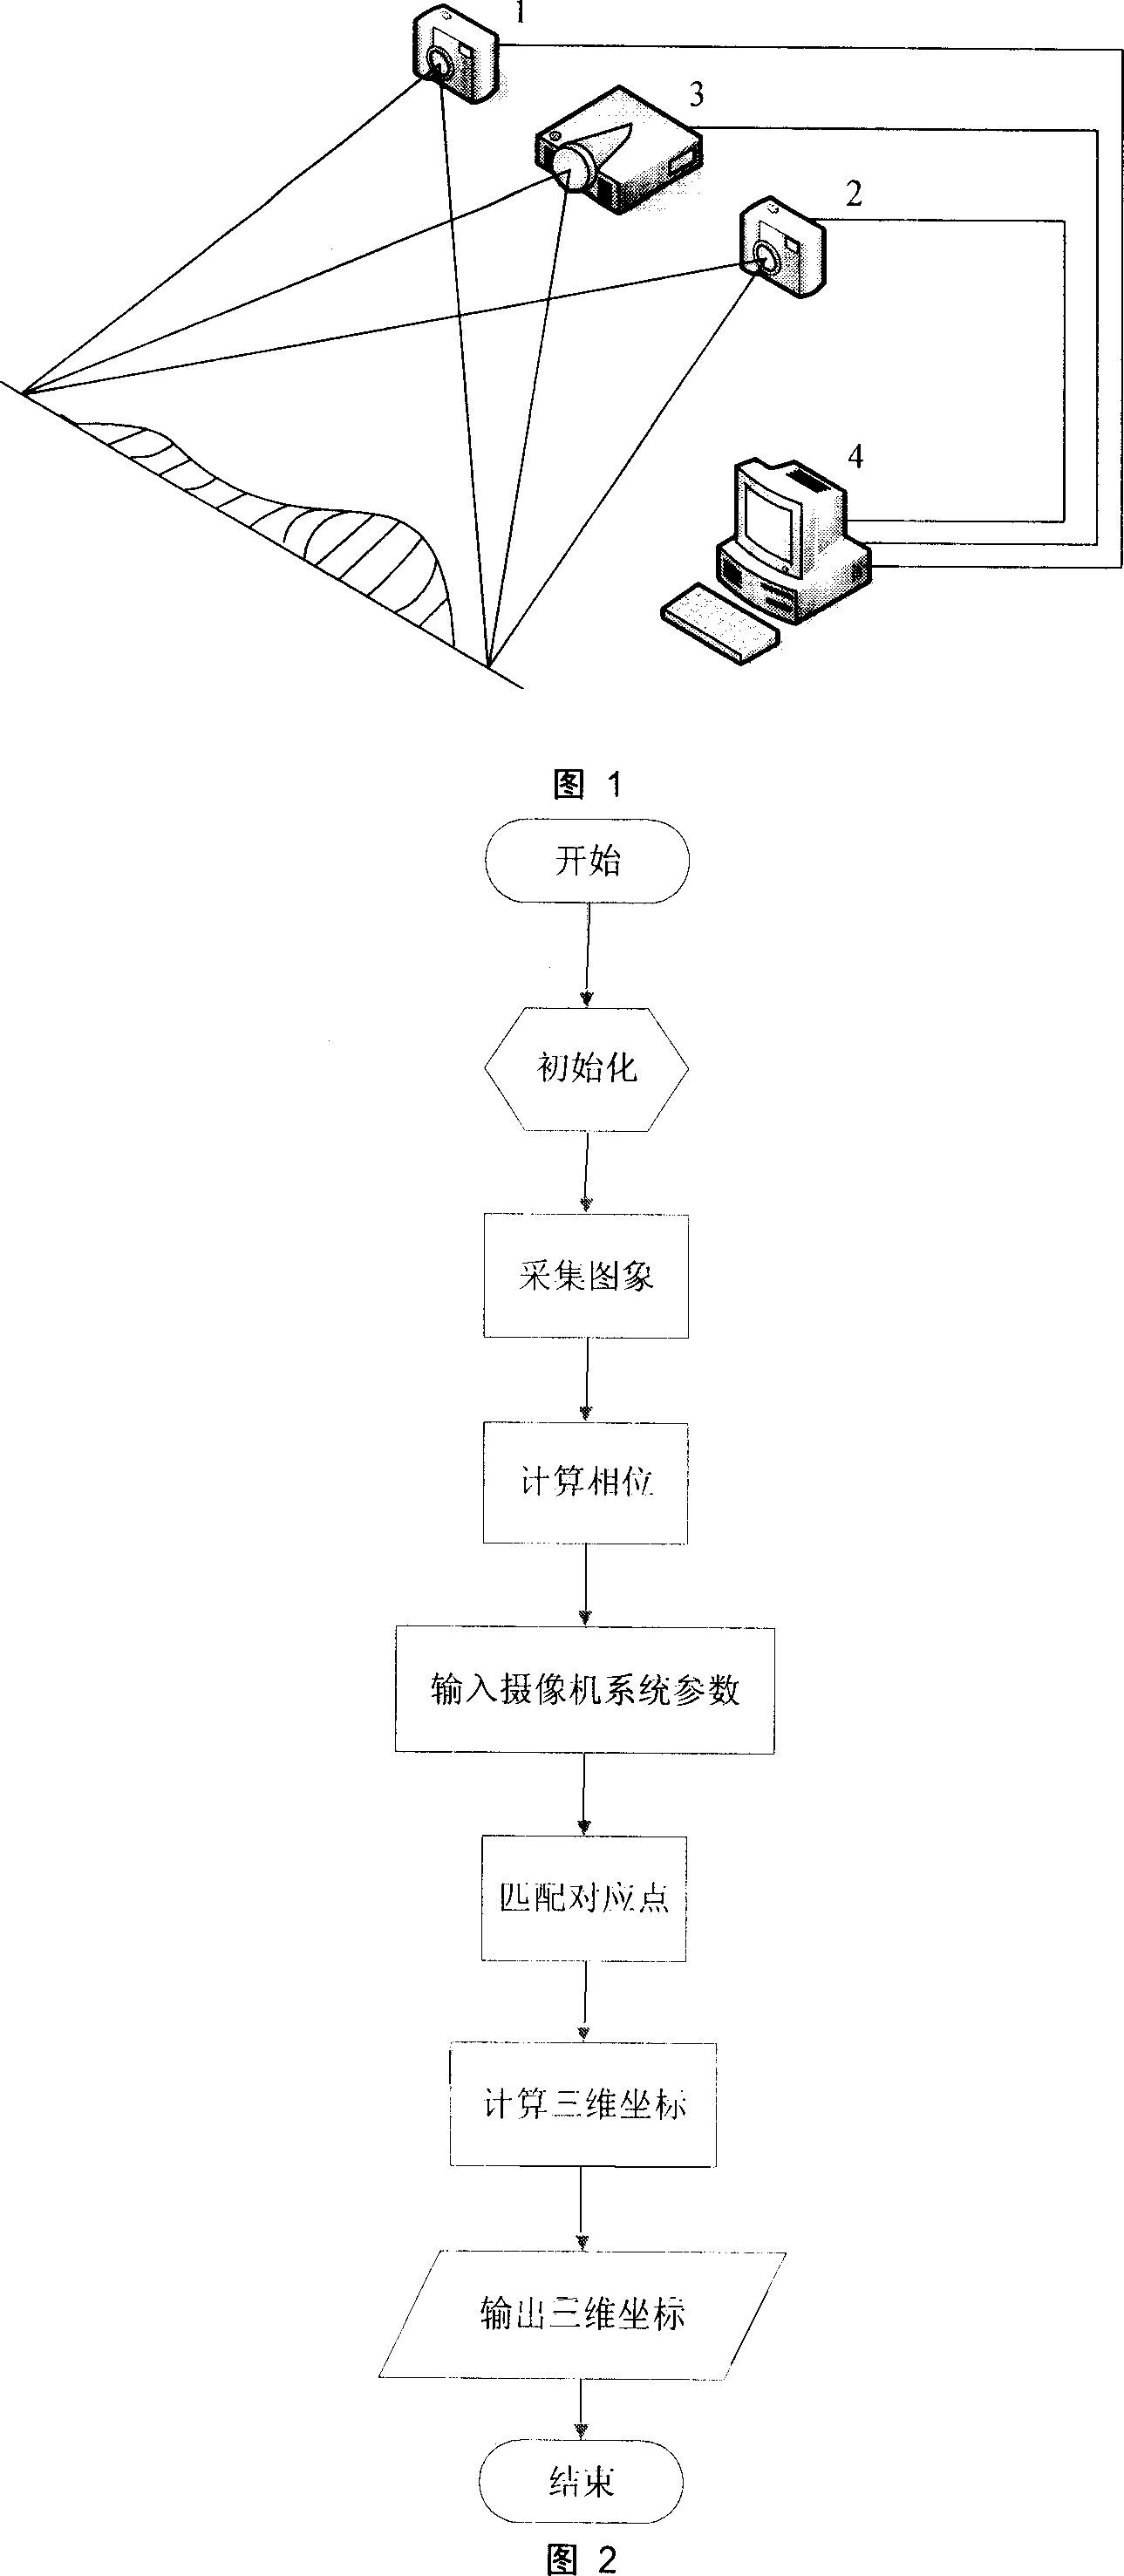 Vision measuring method for projecting multiple frequency grating object surface tri-dimensional profile